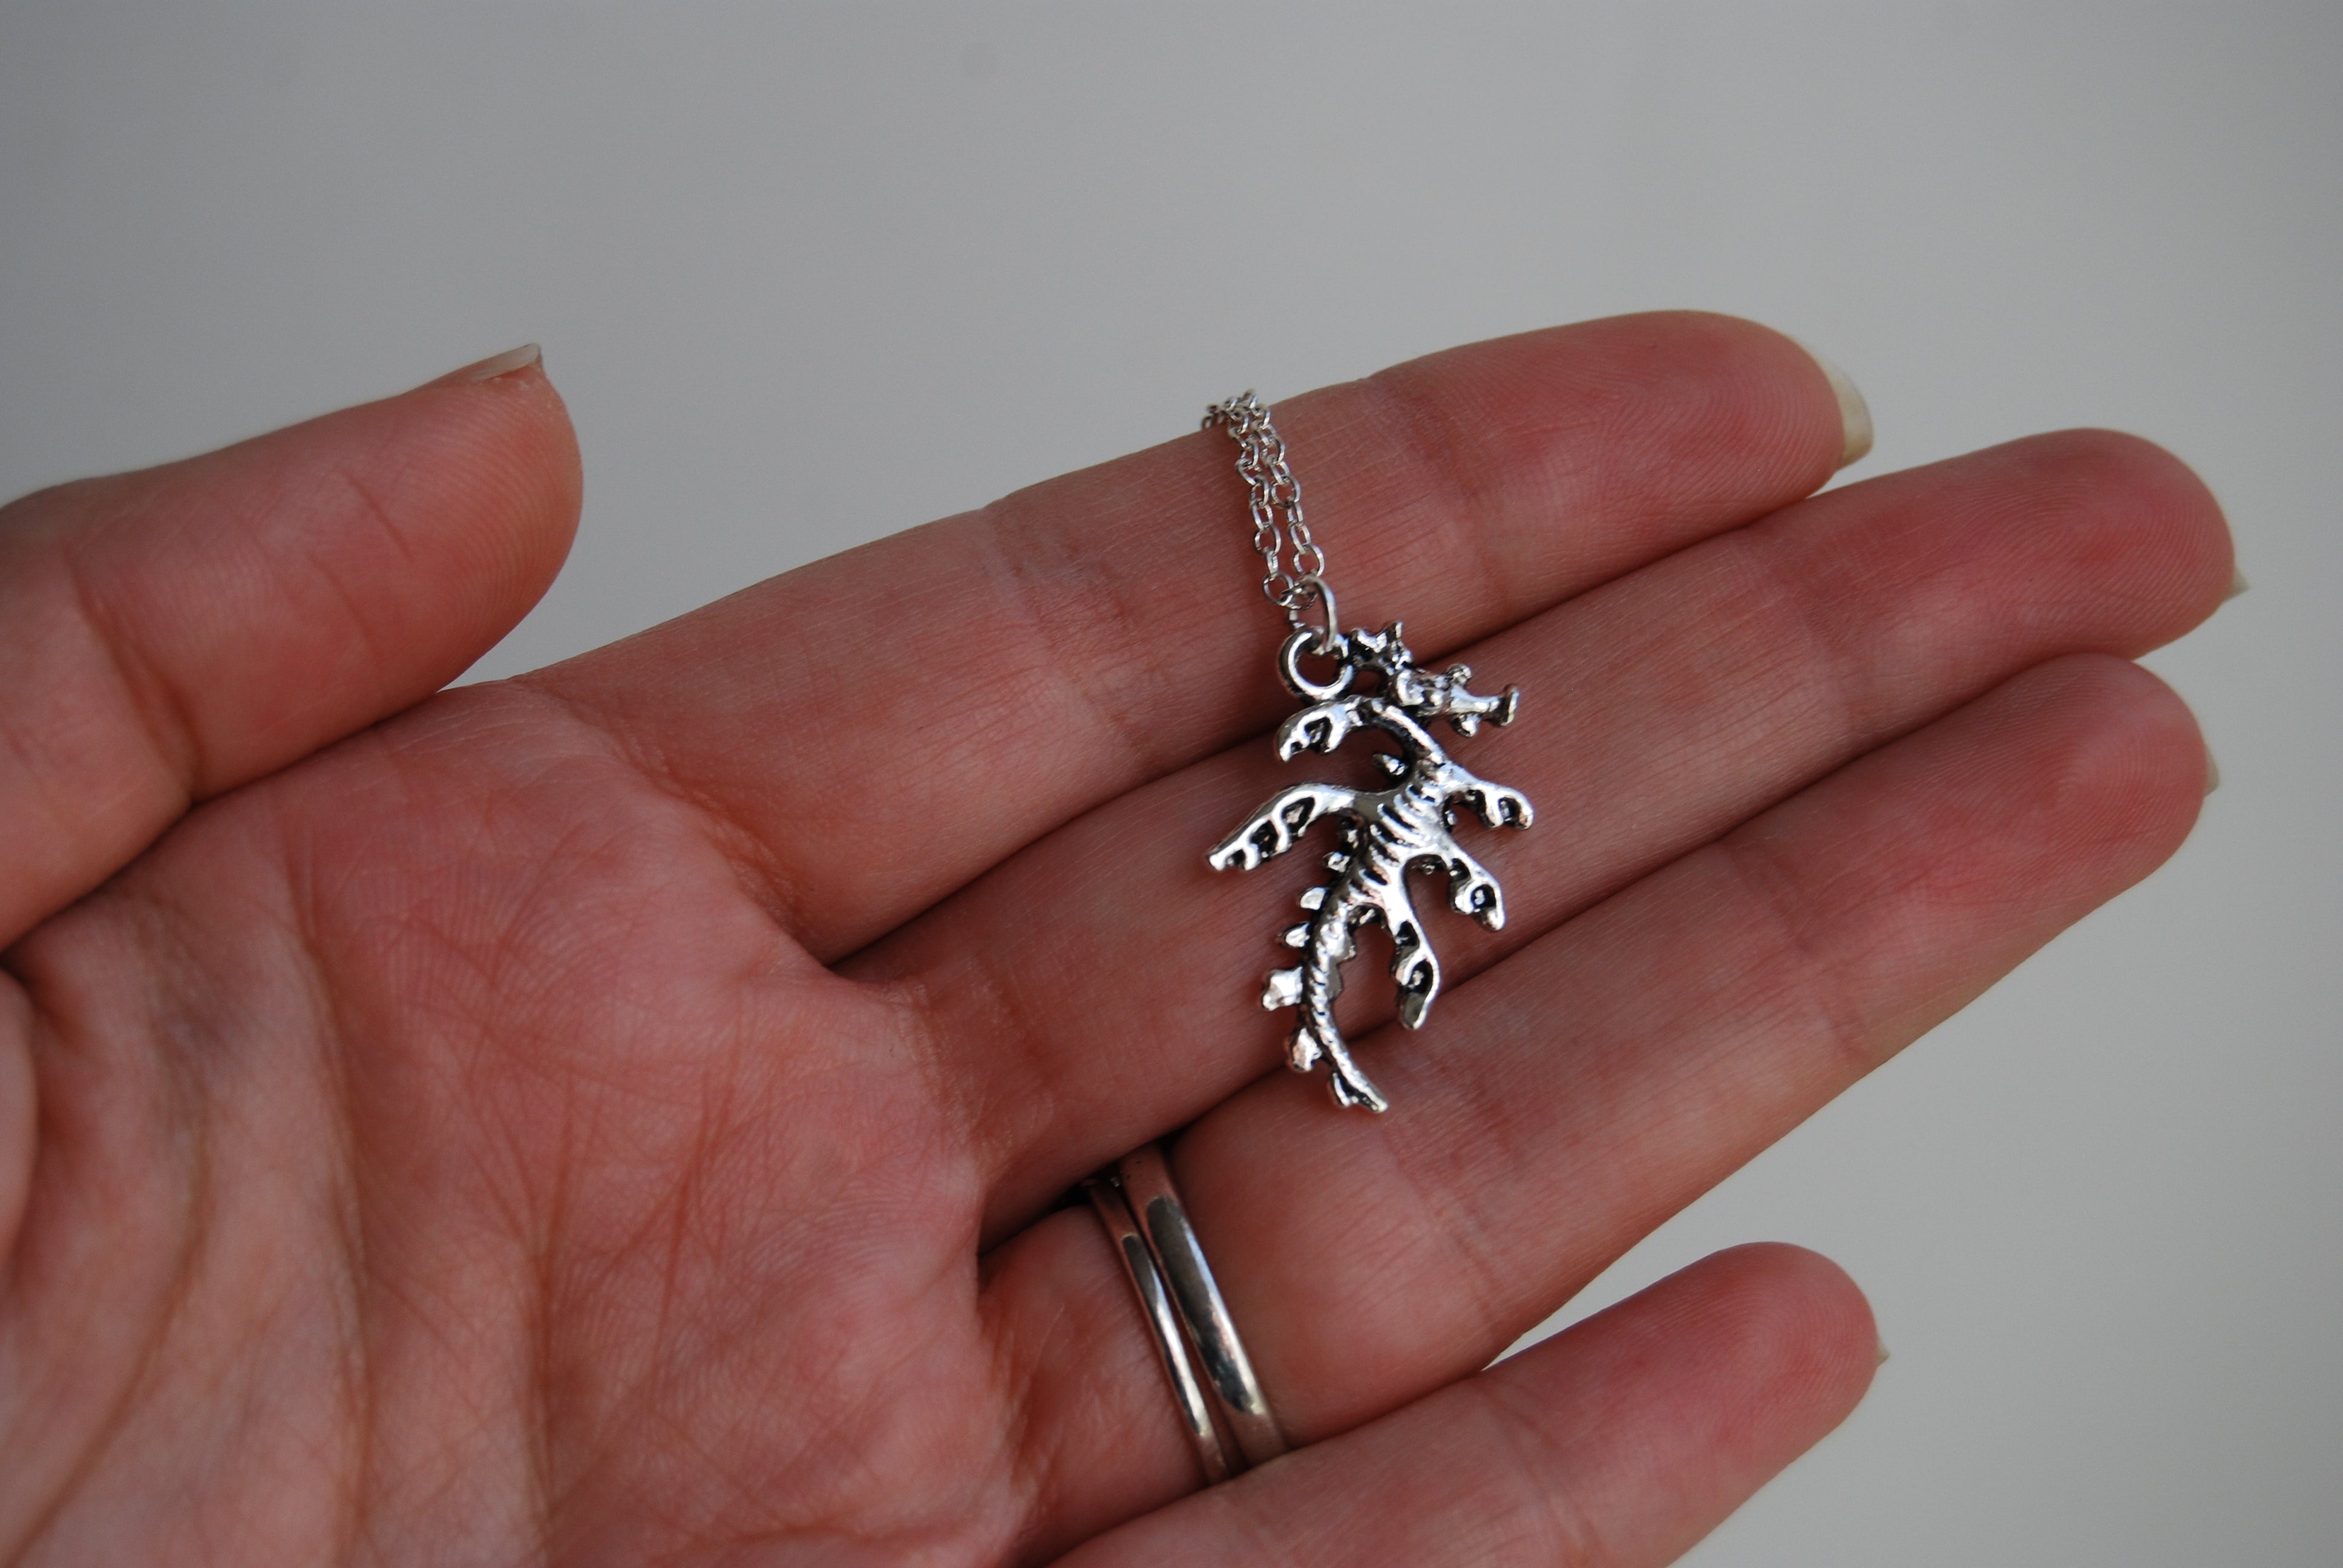 Sea Dragon Necklace | Silver Sea Dragon Charm Necklace | Nautical Sea Creature Jewelry - Enchanted Leaves - Nature Jewelry - Unique Handmade Gifts